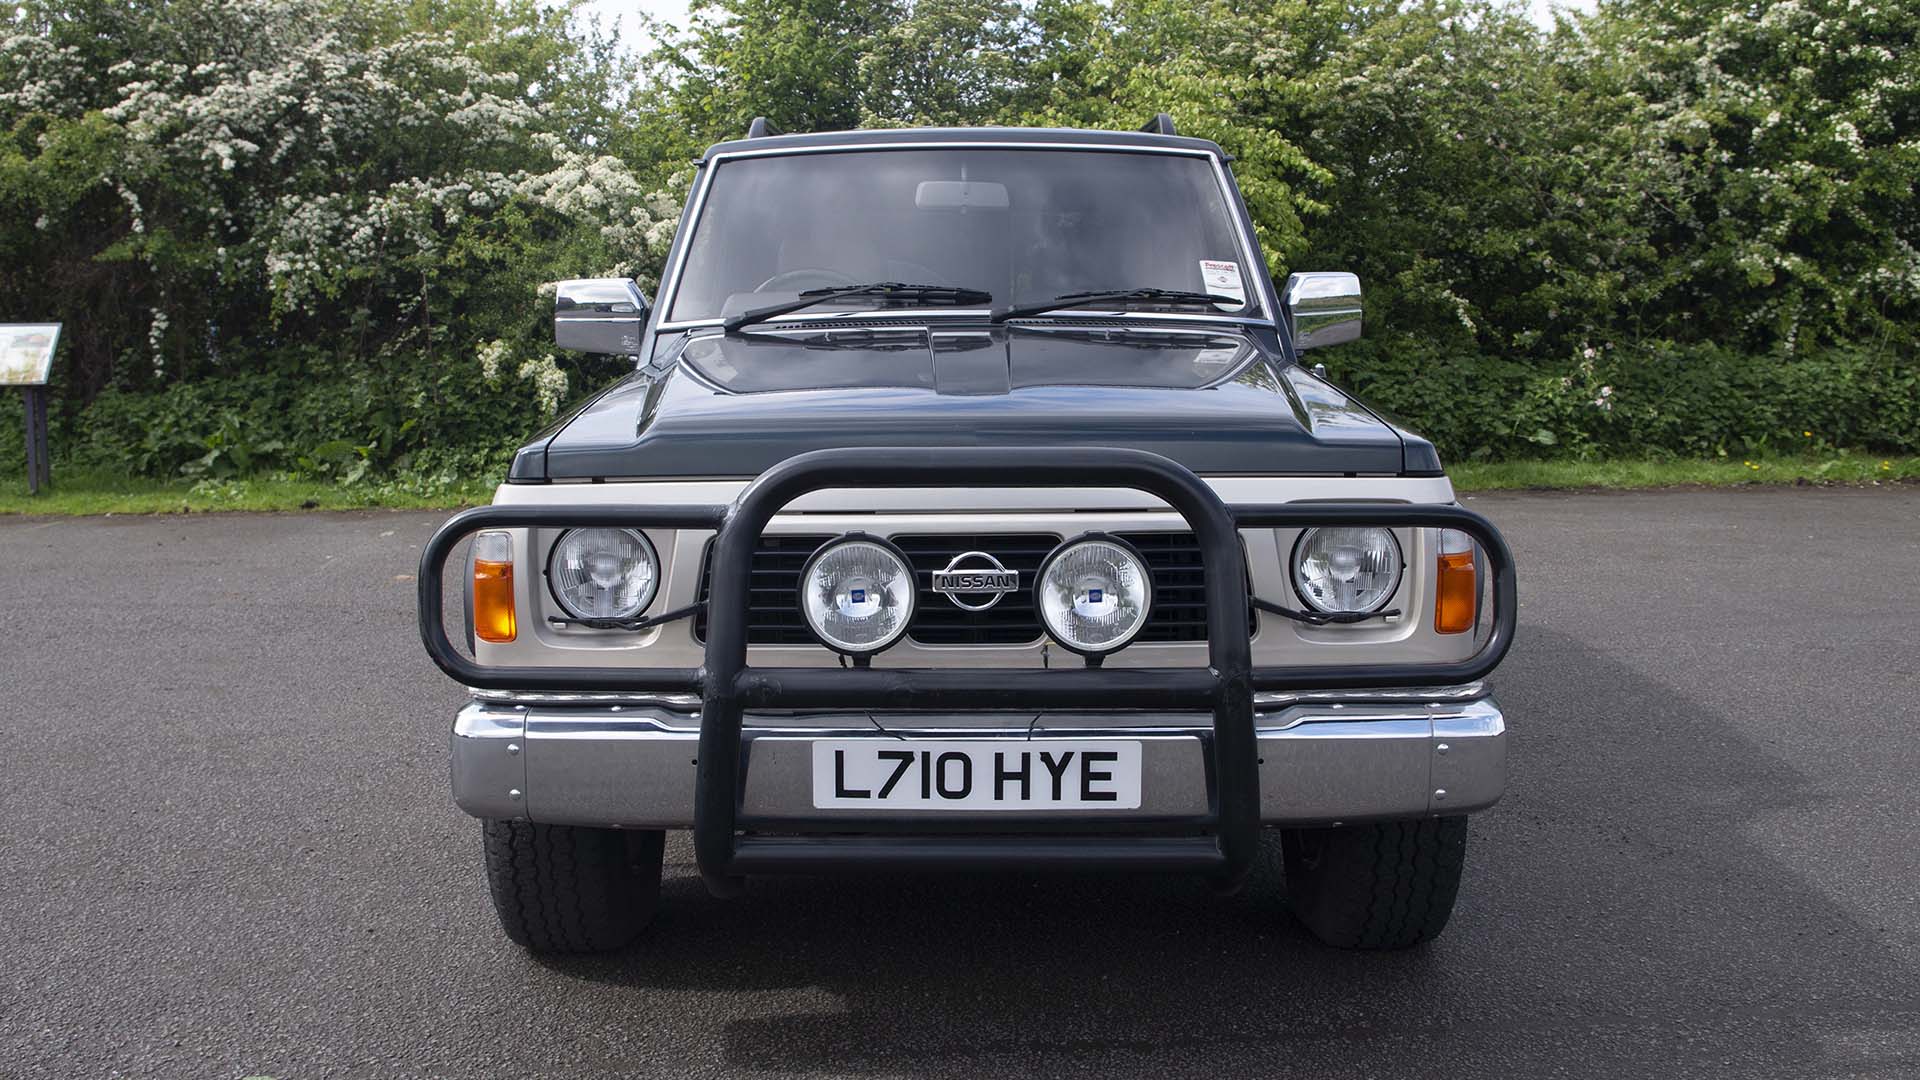 Classic.Retro.Modern. - This Nissan Patrol is perfect for a military coup